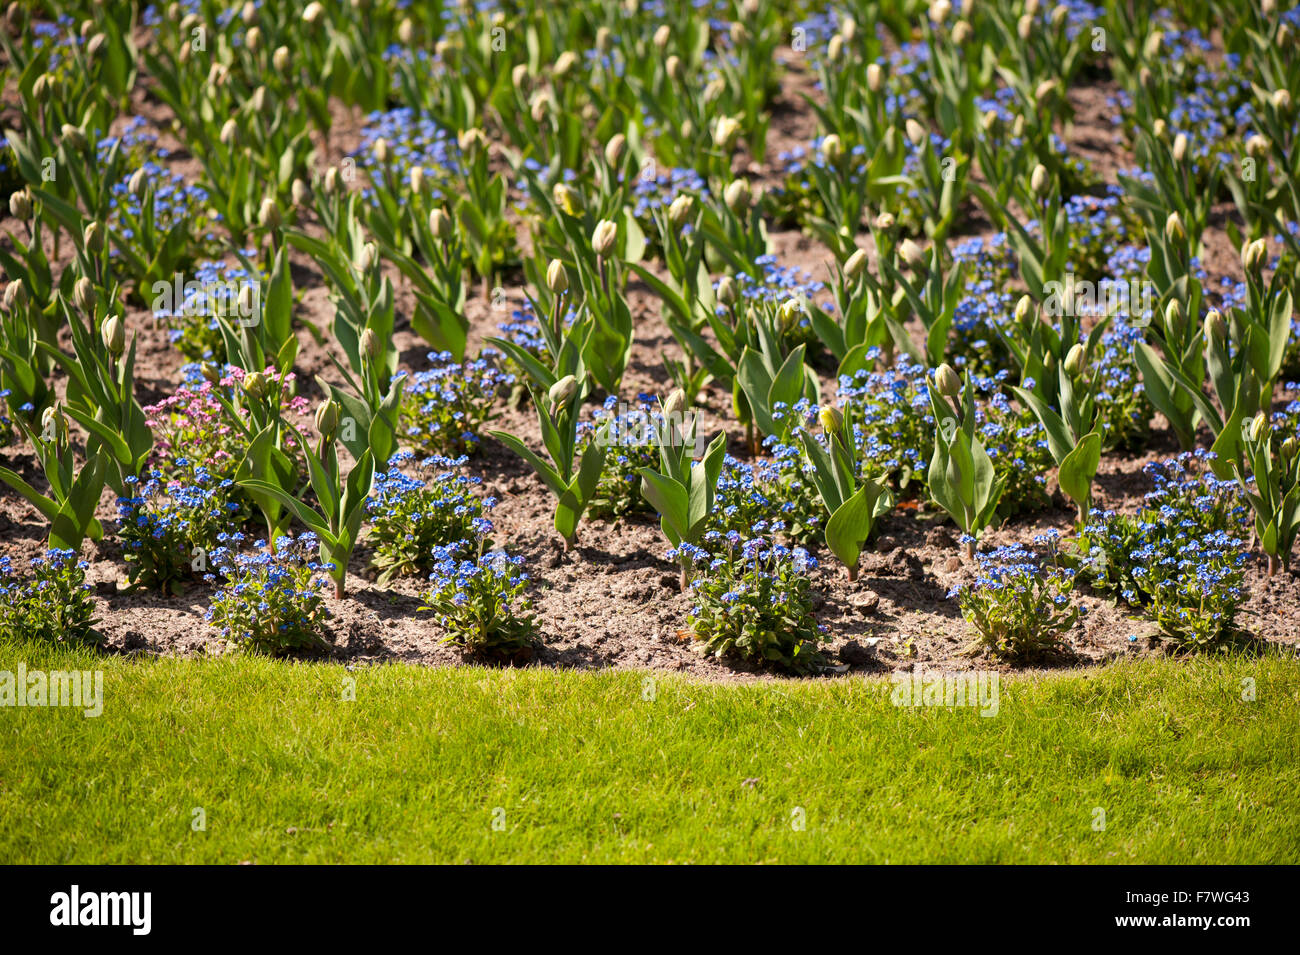 Ornamental garden flowers bedding of blue Forget me nots and tulips buds, bright blue flowering plants with vibrant green leaves Stock Photo